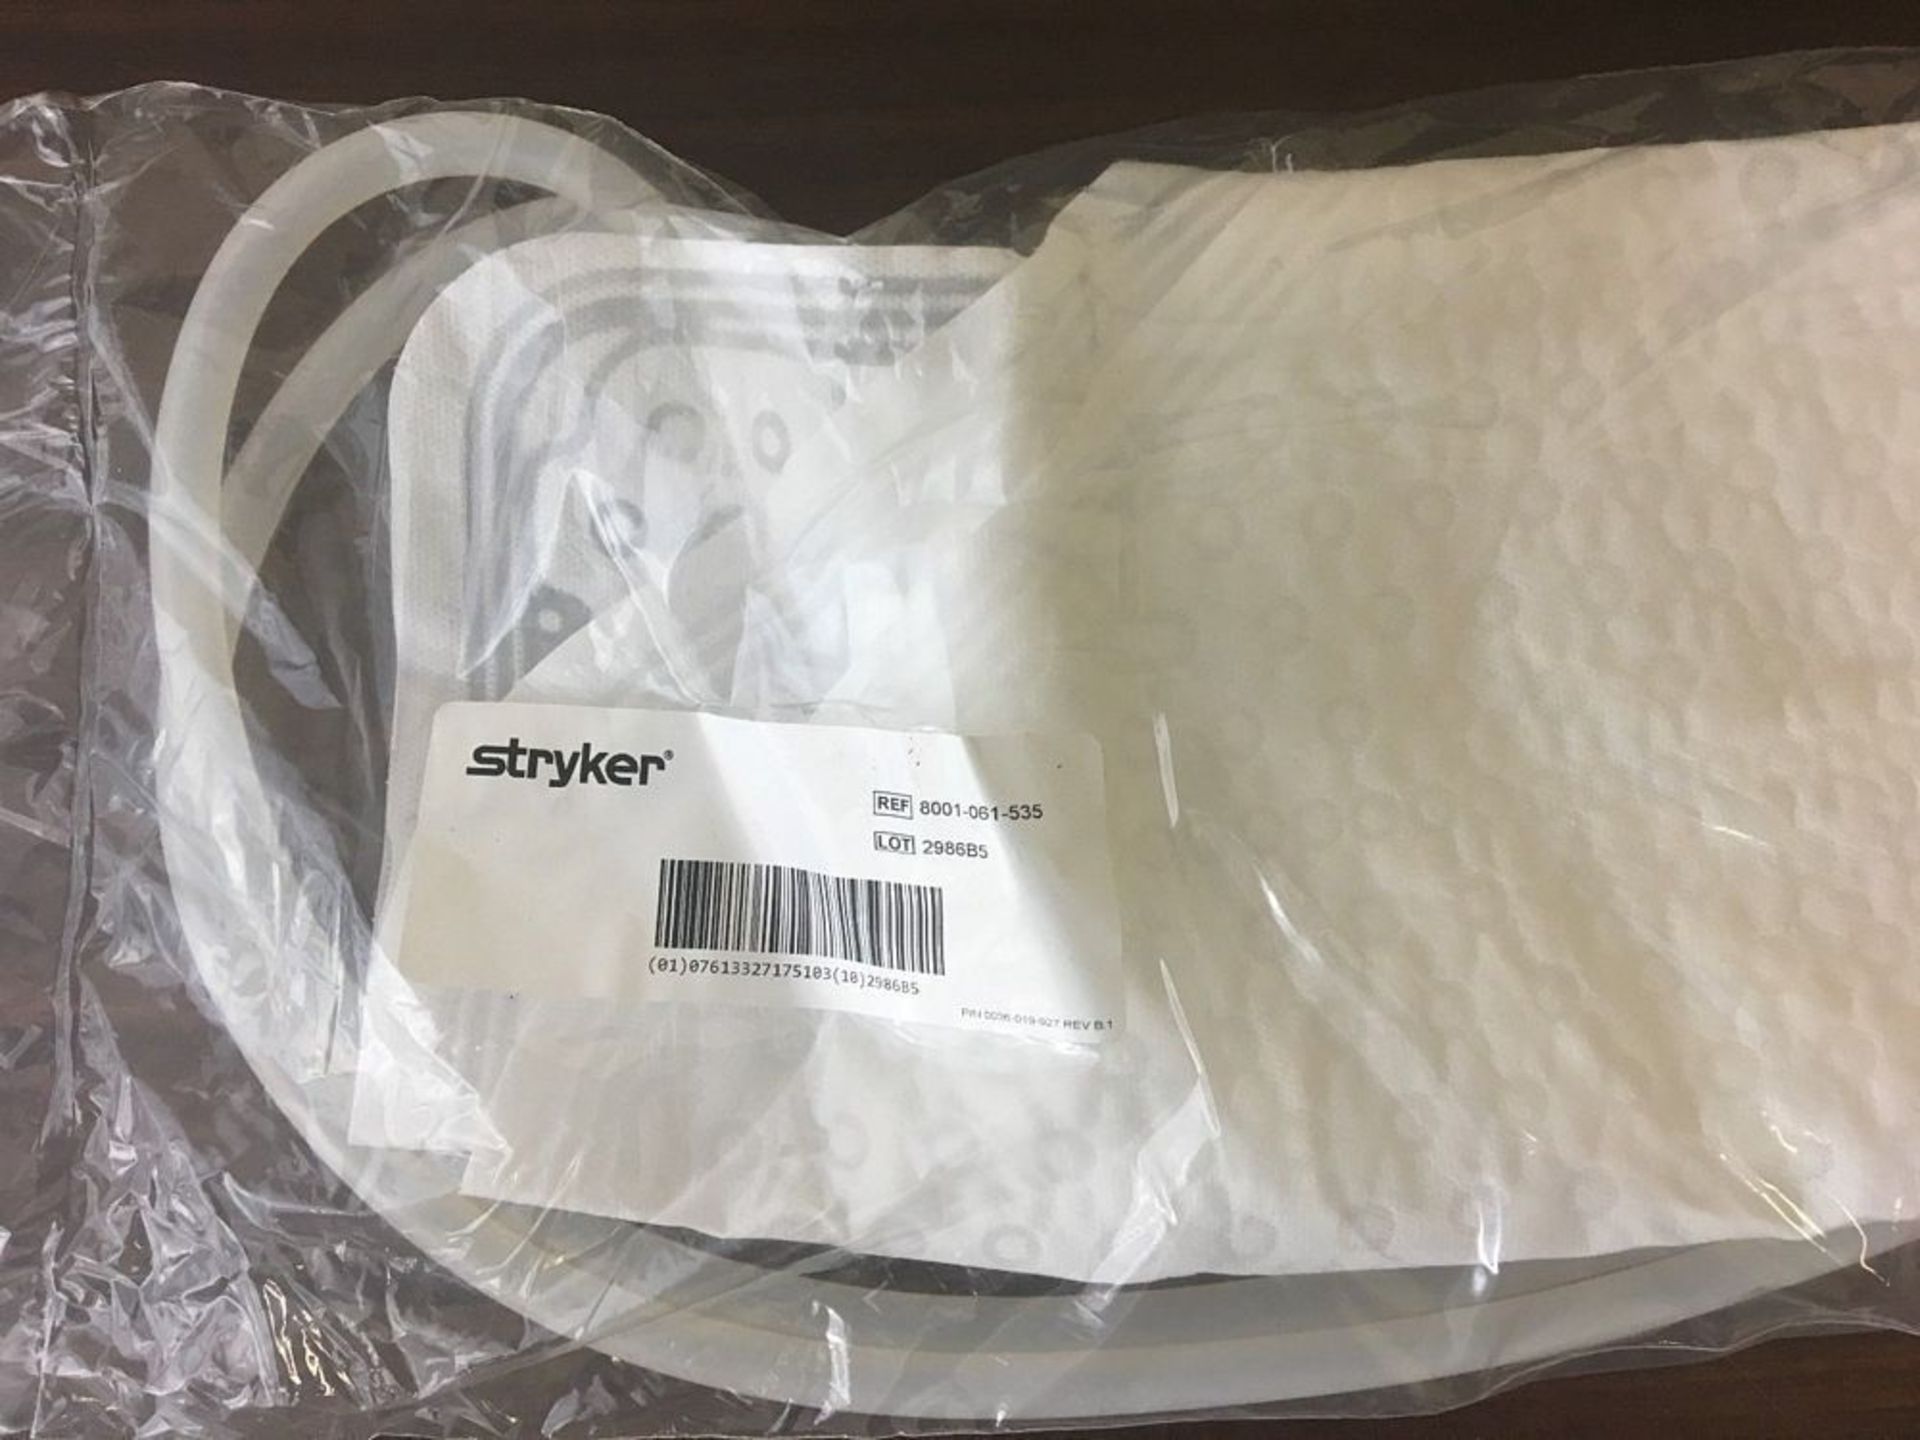 5 X New Stryker Rapr-Round 8001-061-535 Catheter Medical Hospital Equipment   retail is $89 a unit - Image 2 of 2